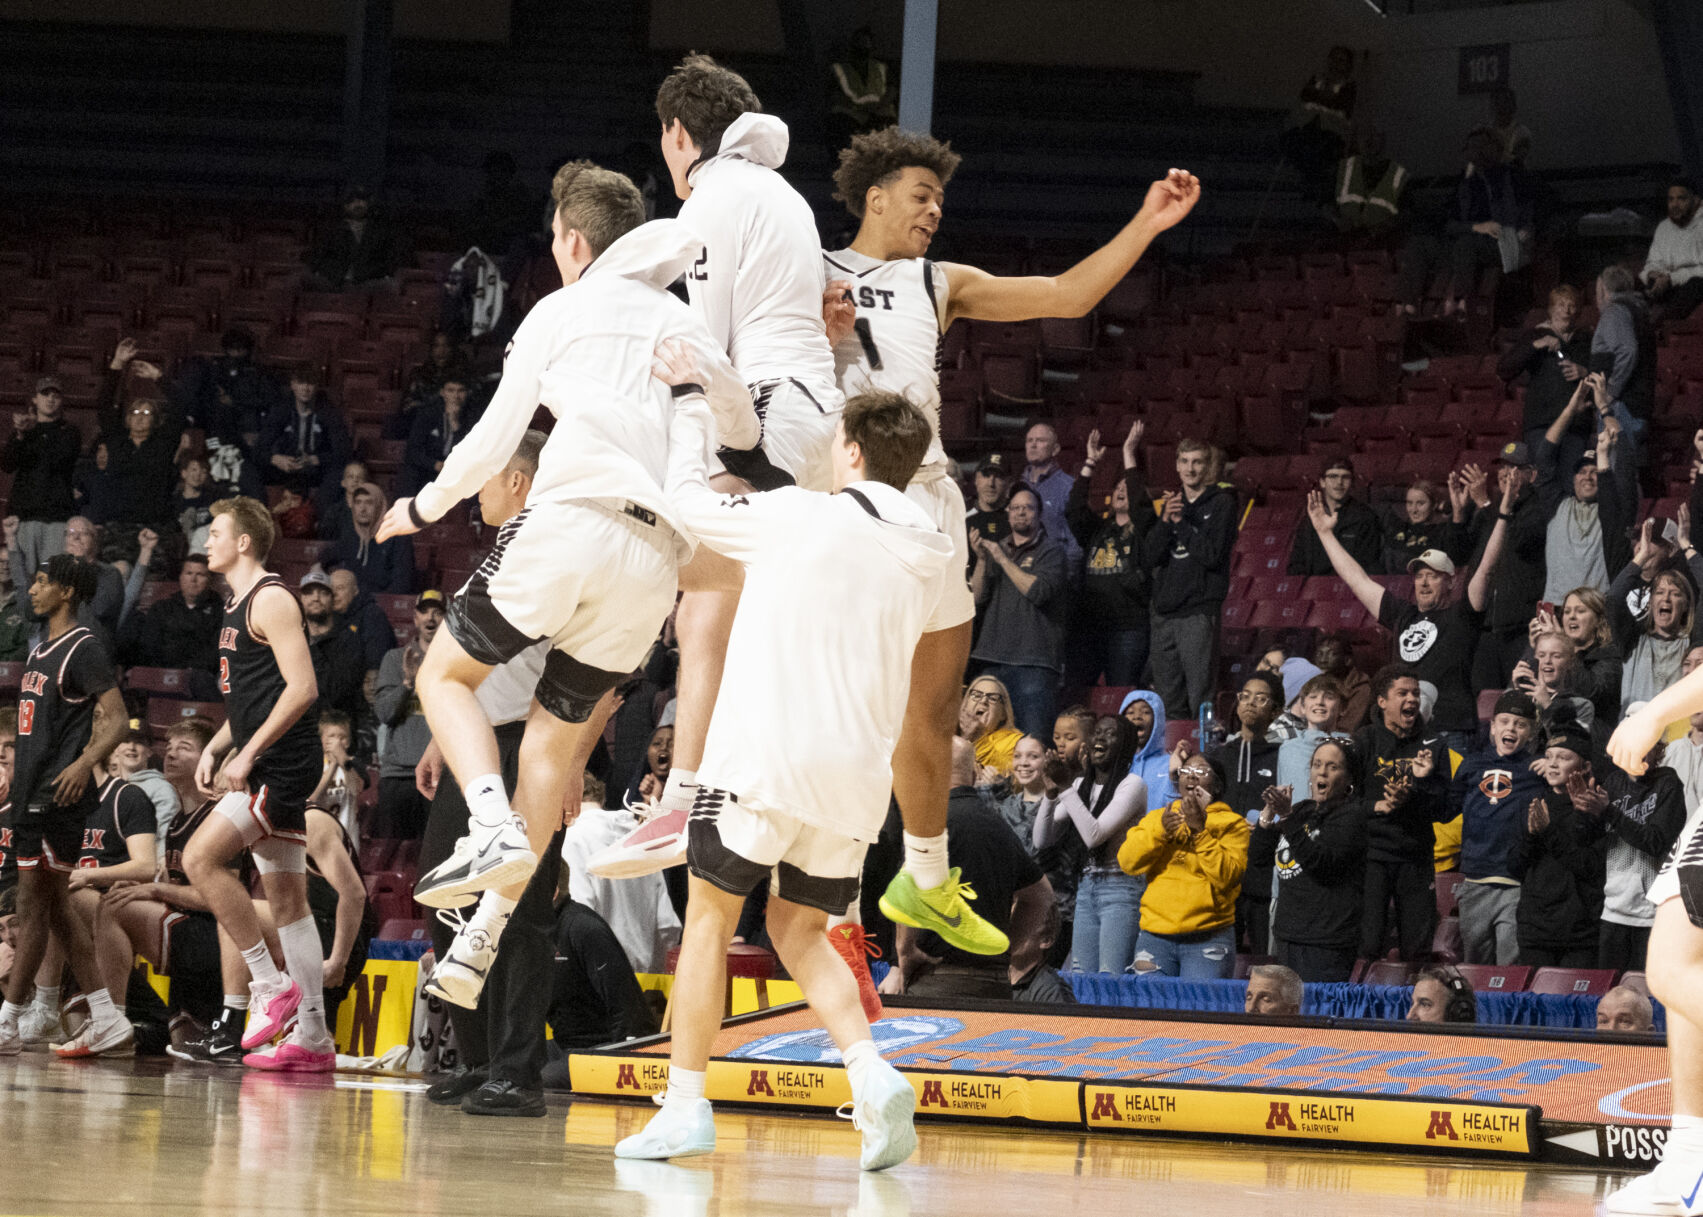 Mankato East stages impressive comeback to win state semifinal in boys basketball